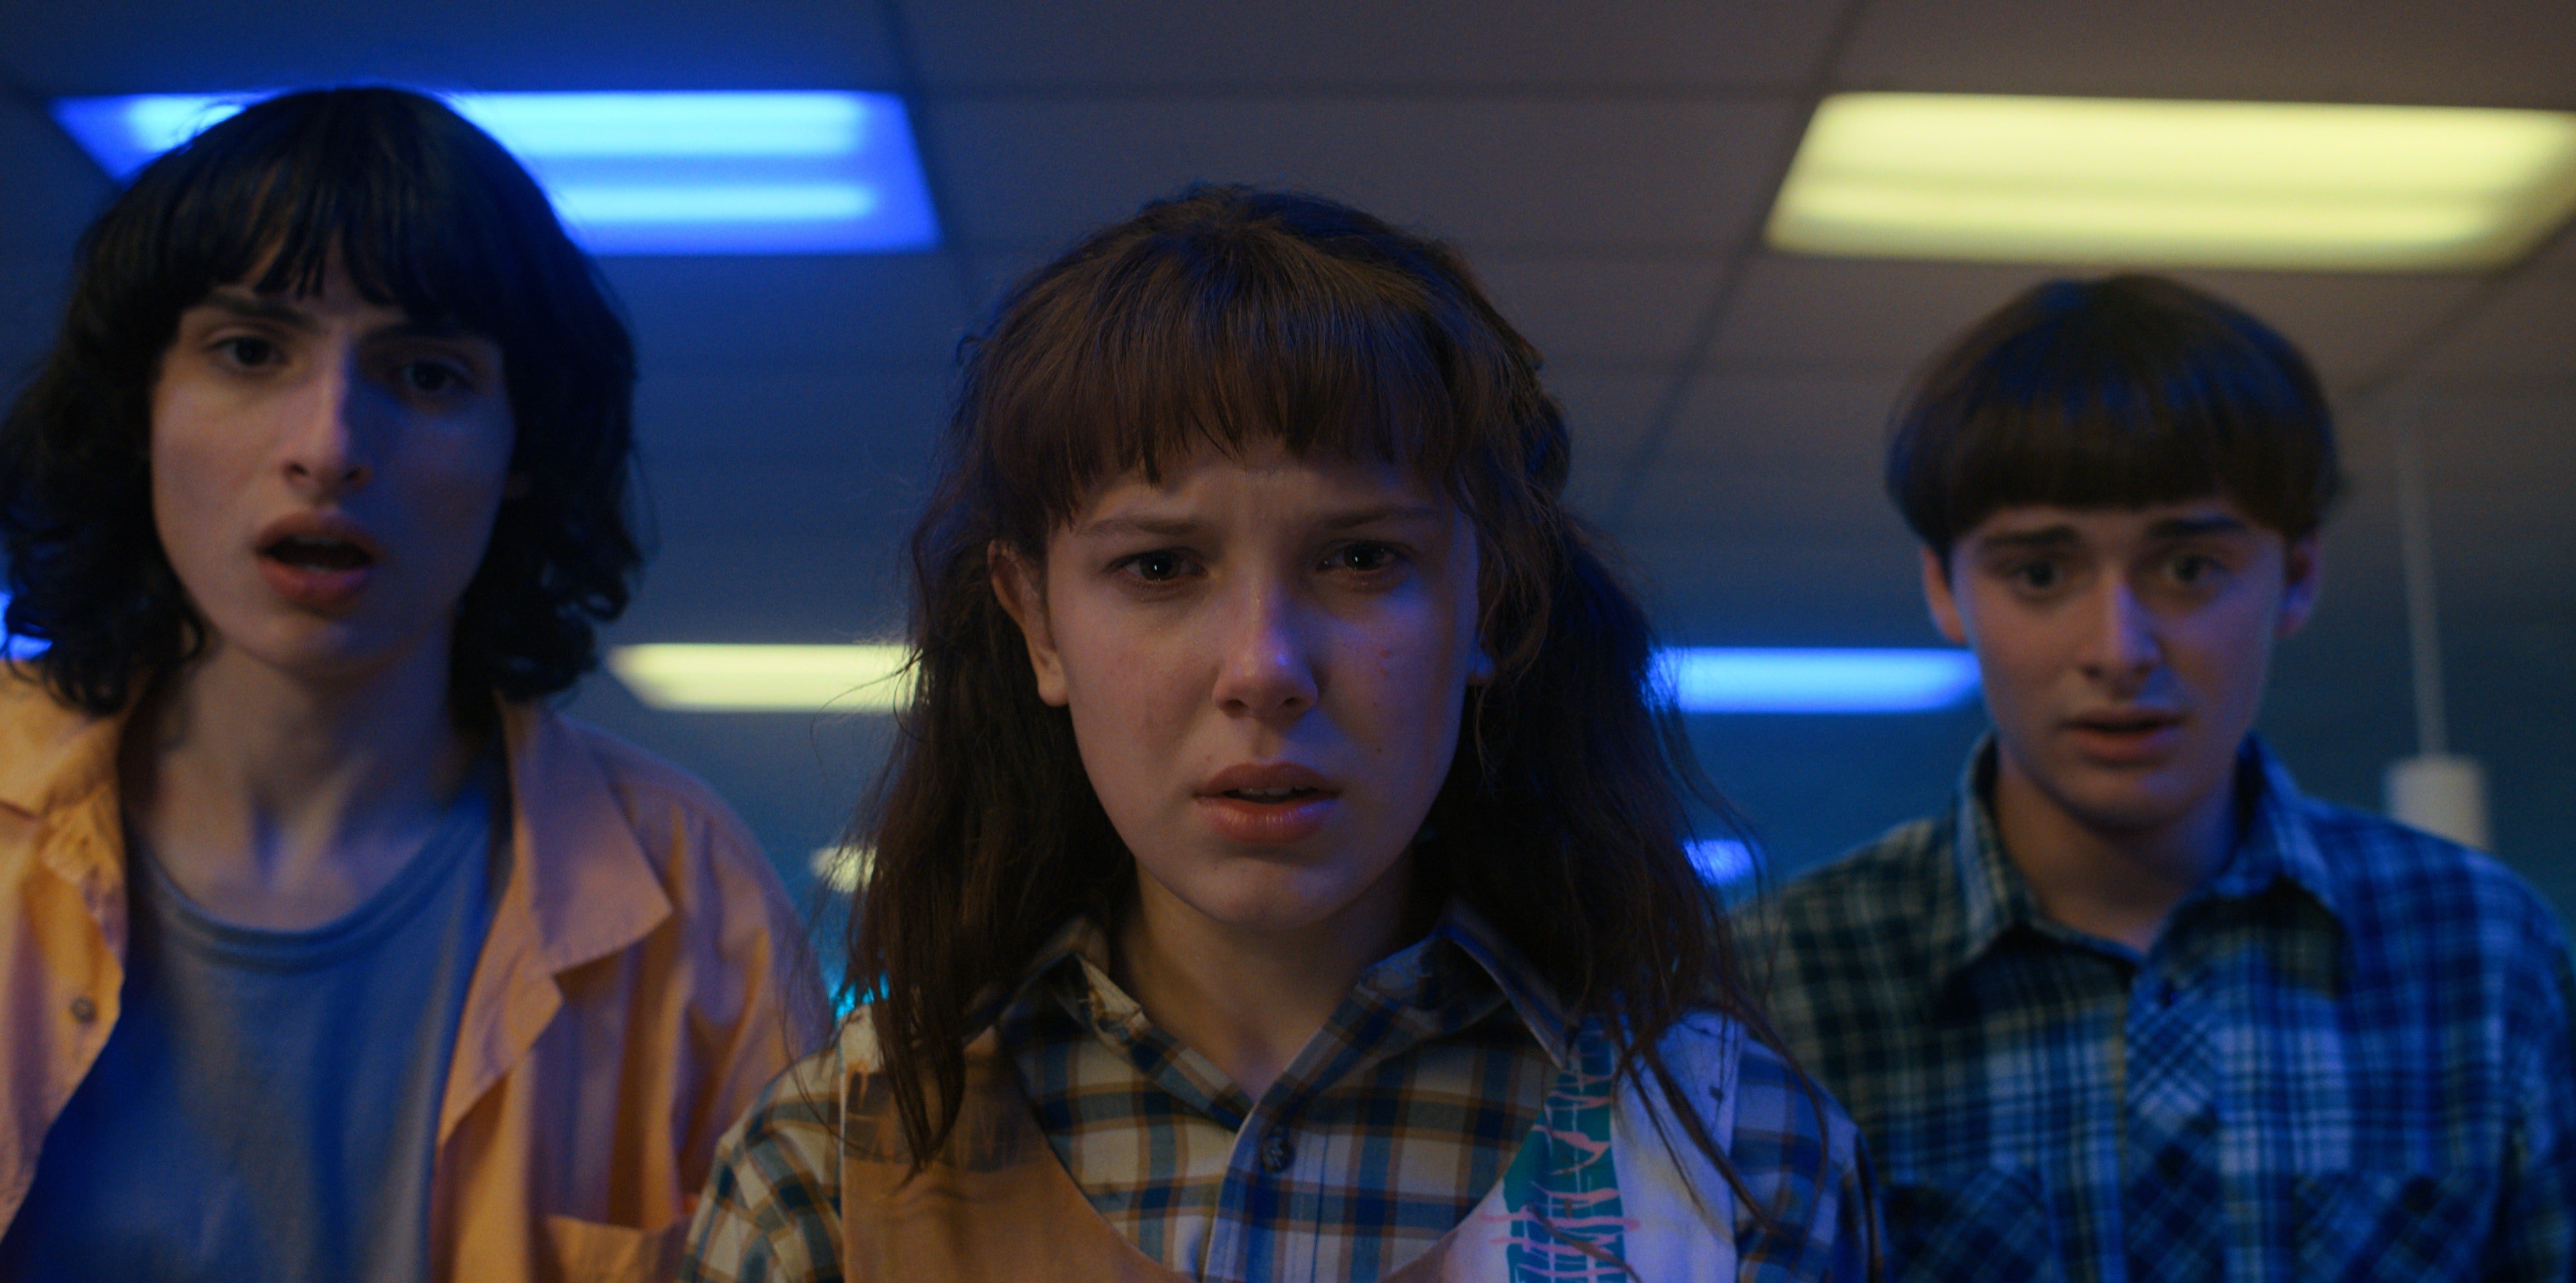 Every Question You Have About 'Stranger Things' Season Answered